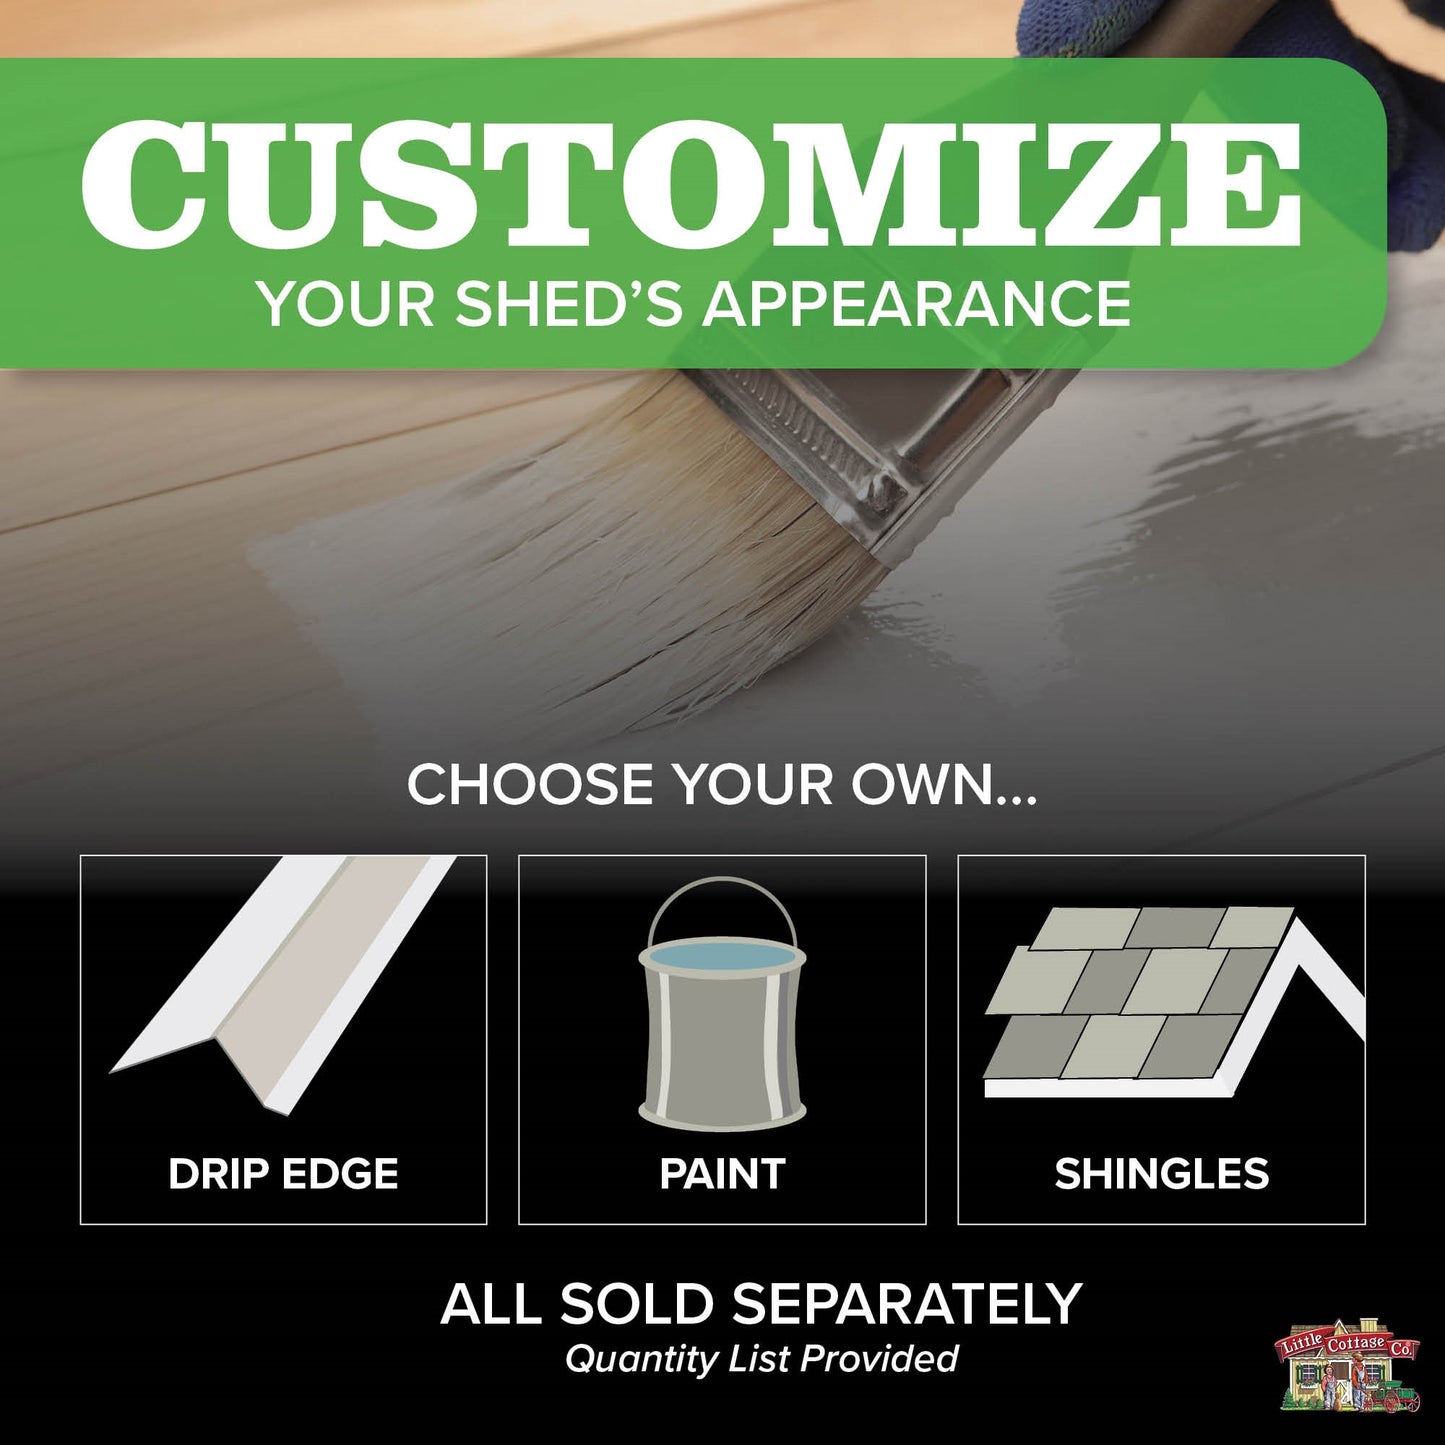 customize your shed's appearance with drip edge, paint, and shingles